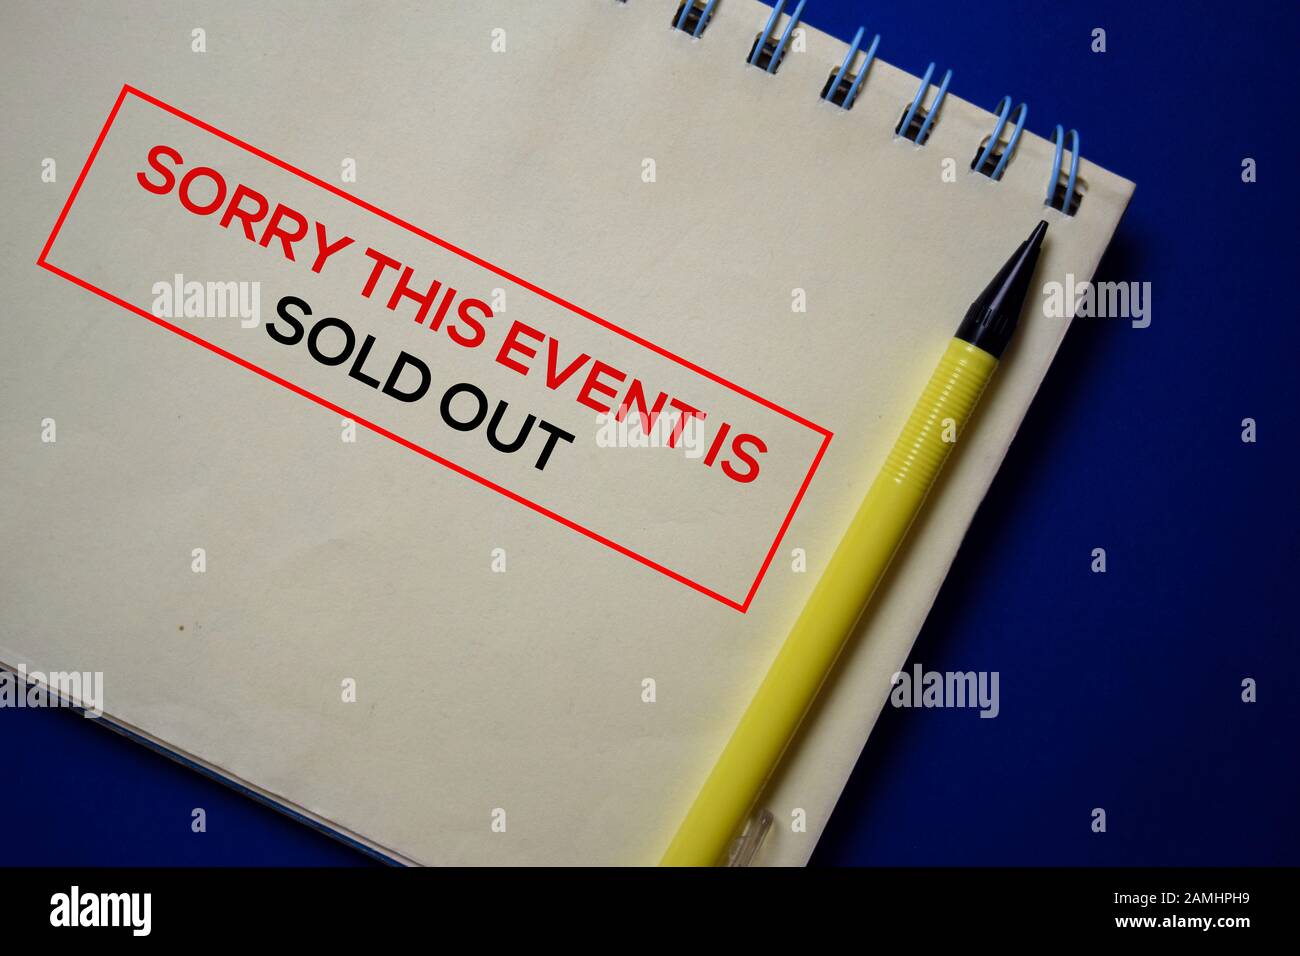 Sorry This Event Is Sold Out write on a book isolated on blue background. Stock Photo